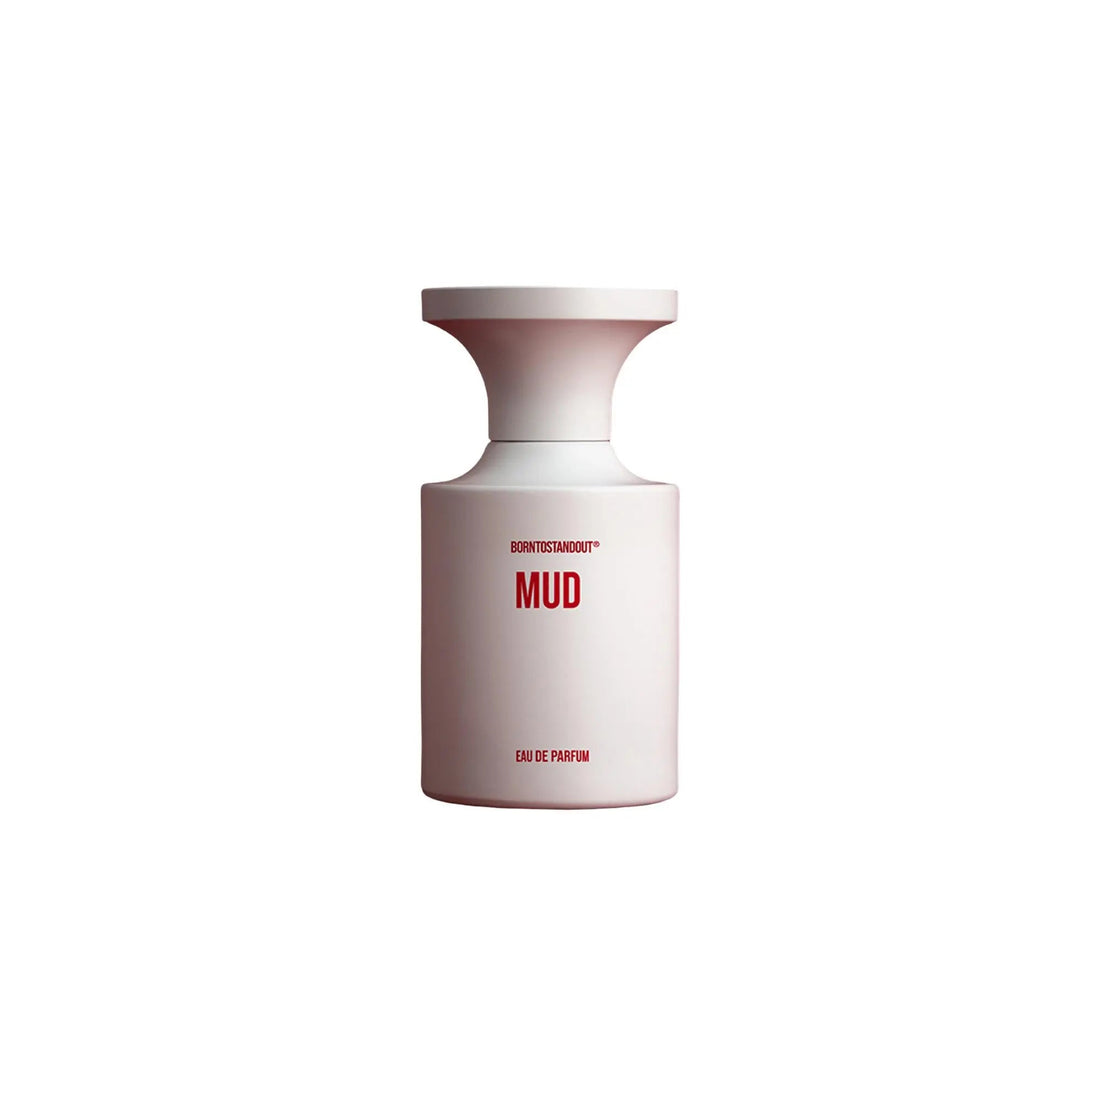 Born to stand out Mud - 50ml